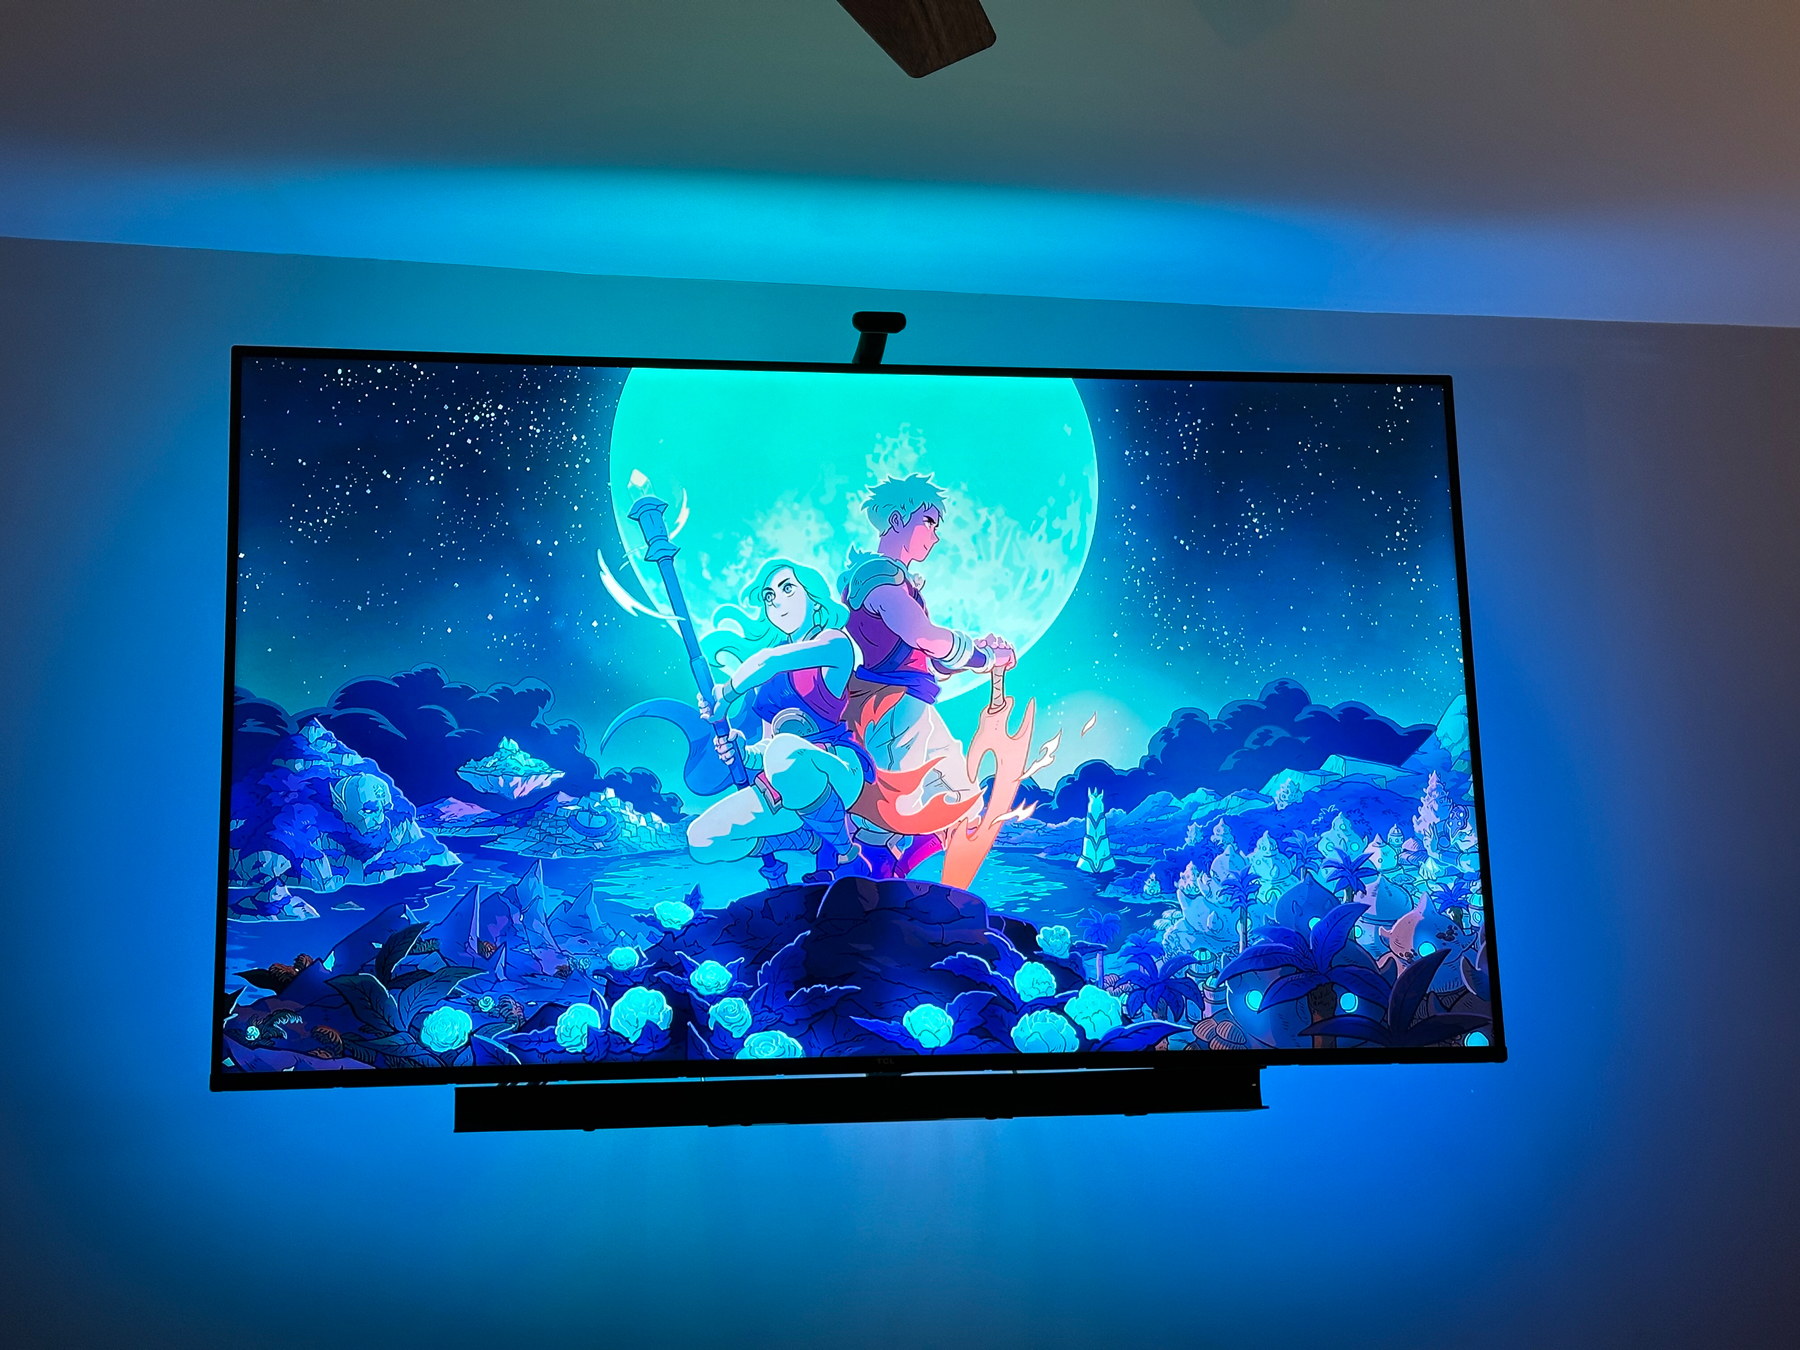 Animated fantasy artwork displayed on a screen, featuring a group of stylized characters in a vibrant blue and moonlit setting, surrounded by glowing flowers and a night sky filled with stars. Ambient blue lighting enhances the room’s atmosphere.